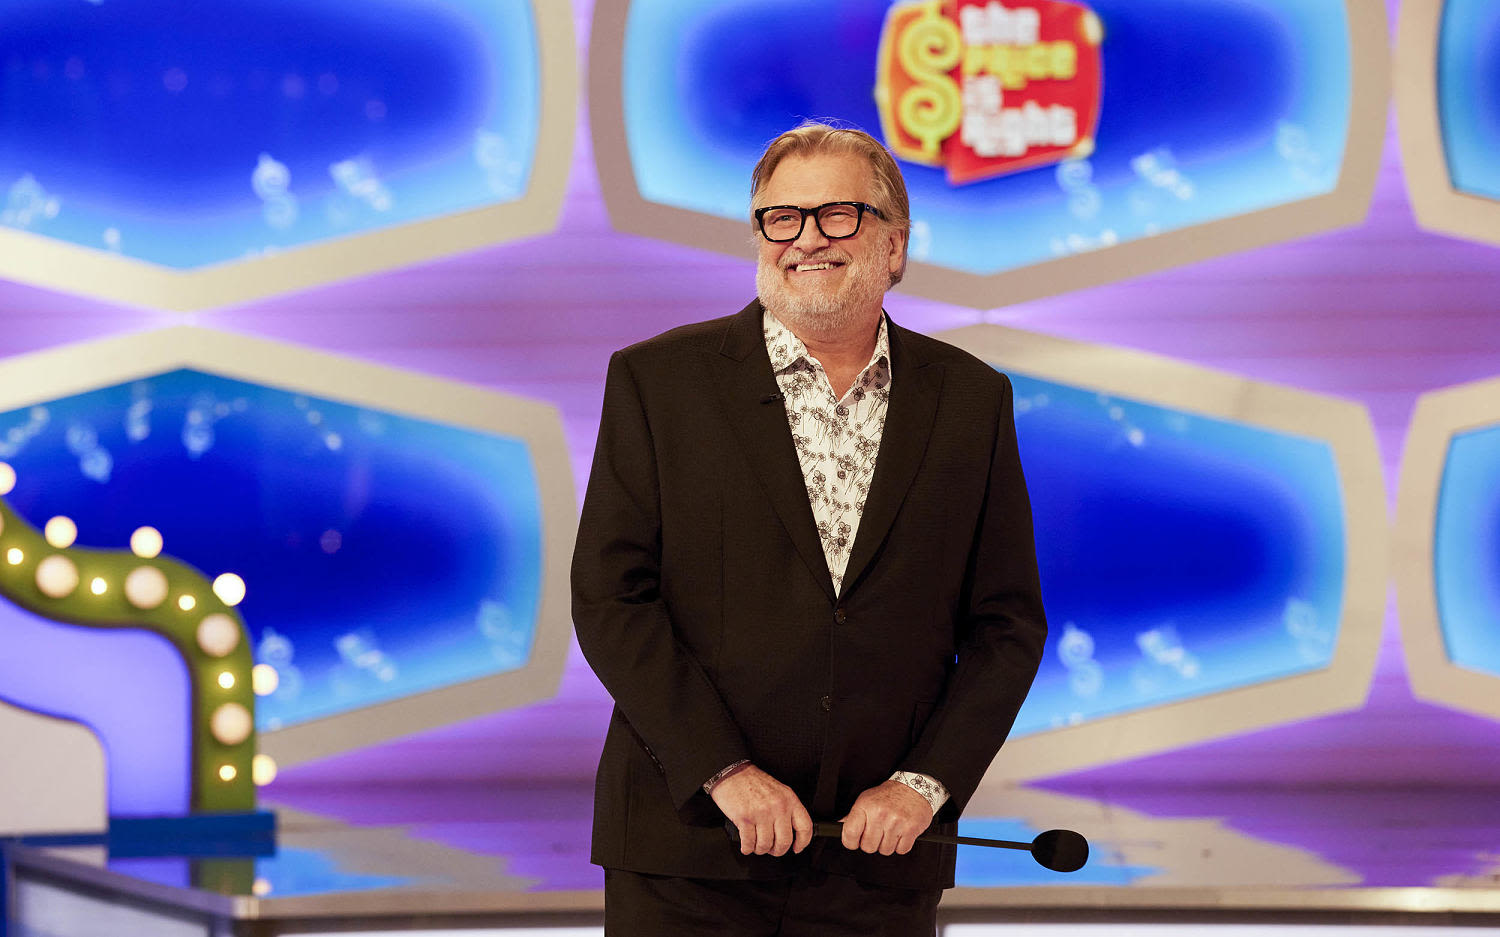 Drew Carey shares how long he wants to continue hosting 'The Price is Right'